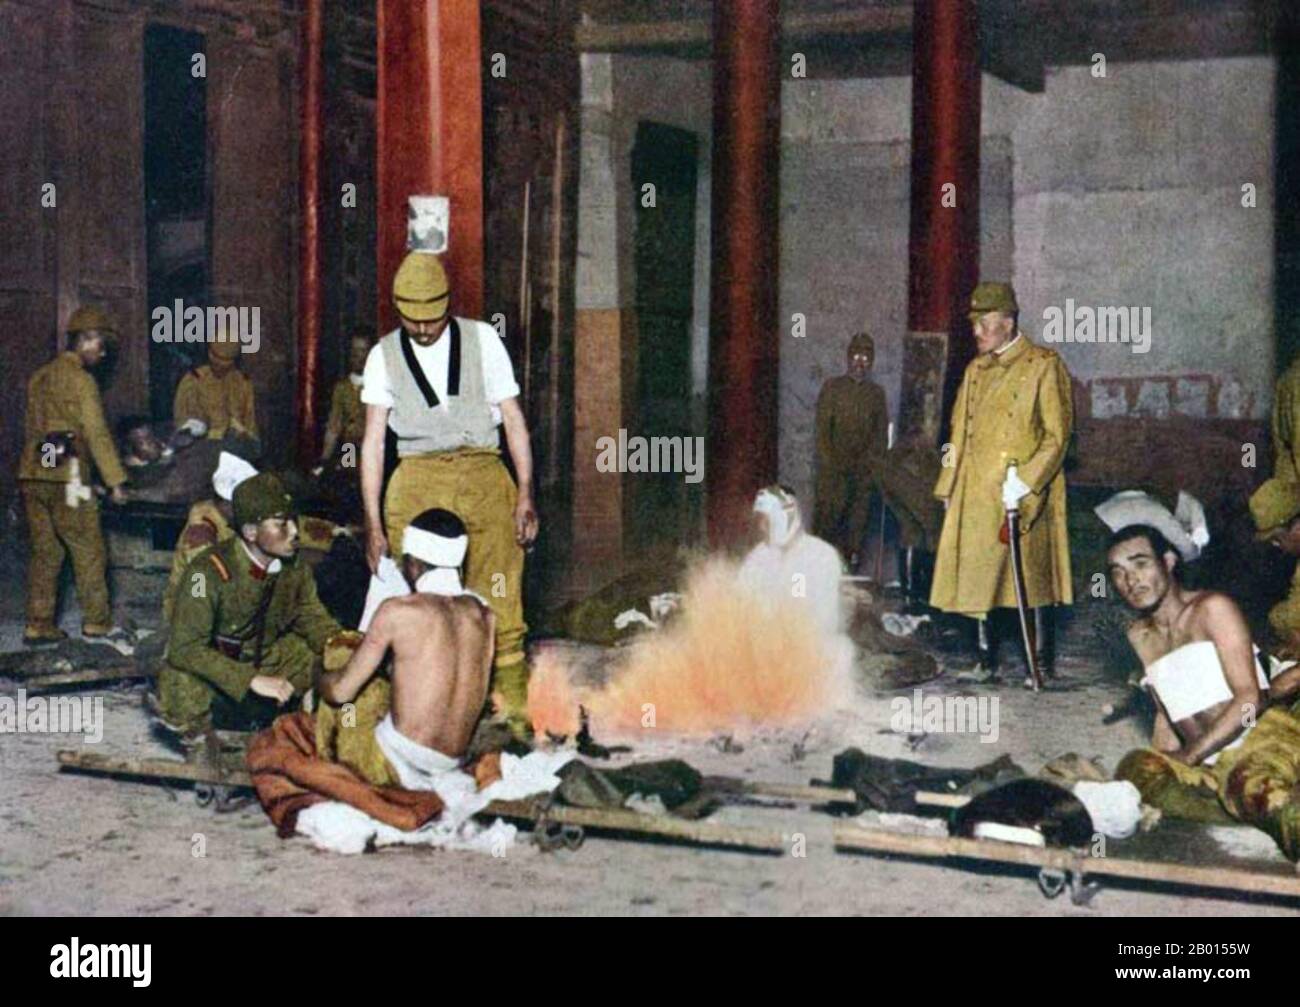 China: Improvised Japanese field hospital, Beijing, 1938. Second Sino-Japanese War (July 7, 1937 – September 9, 1945).  The Second Sino-Japanese War was a military conflict fought primarily between the Republic of China and the Empire of Japan. After the Japanese attack on Pearl Harbor, the war merged into the greater conflict of World War II as a major front of what is broadly known as the Pacific War. Although the two countries had fought intermittently since 1931, total war started in earnest in 1937 and ended only with the surrender of Japan in 1945. Stock Photo